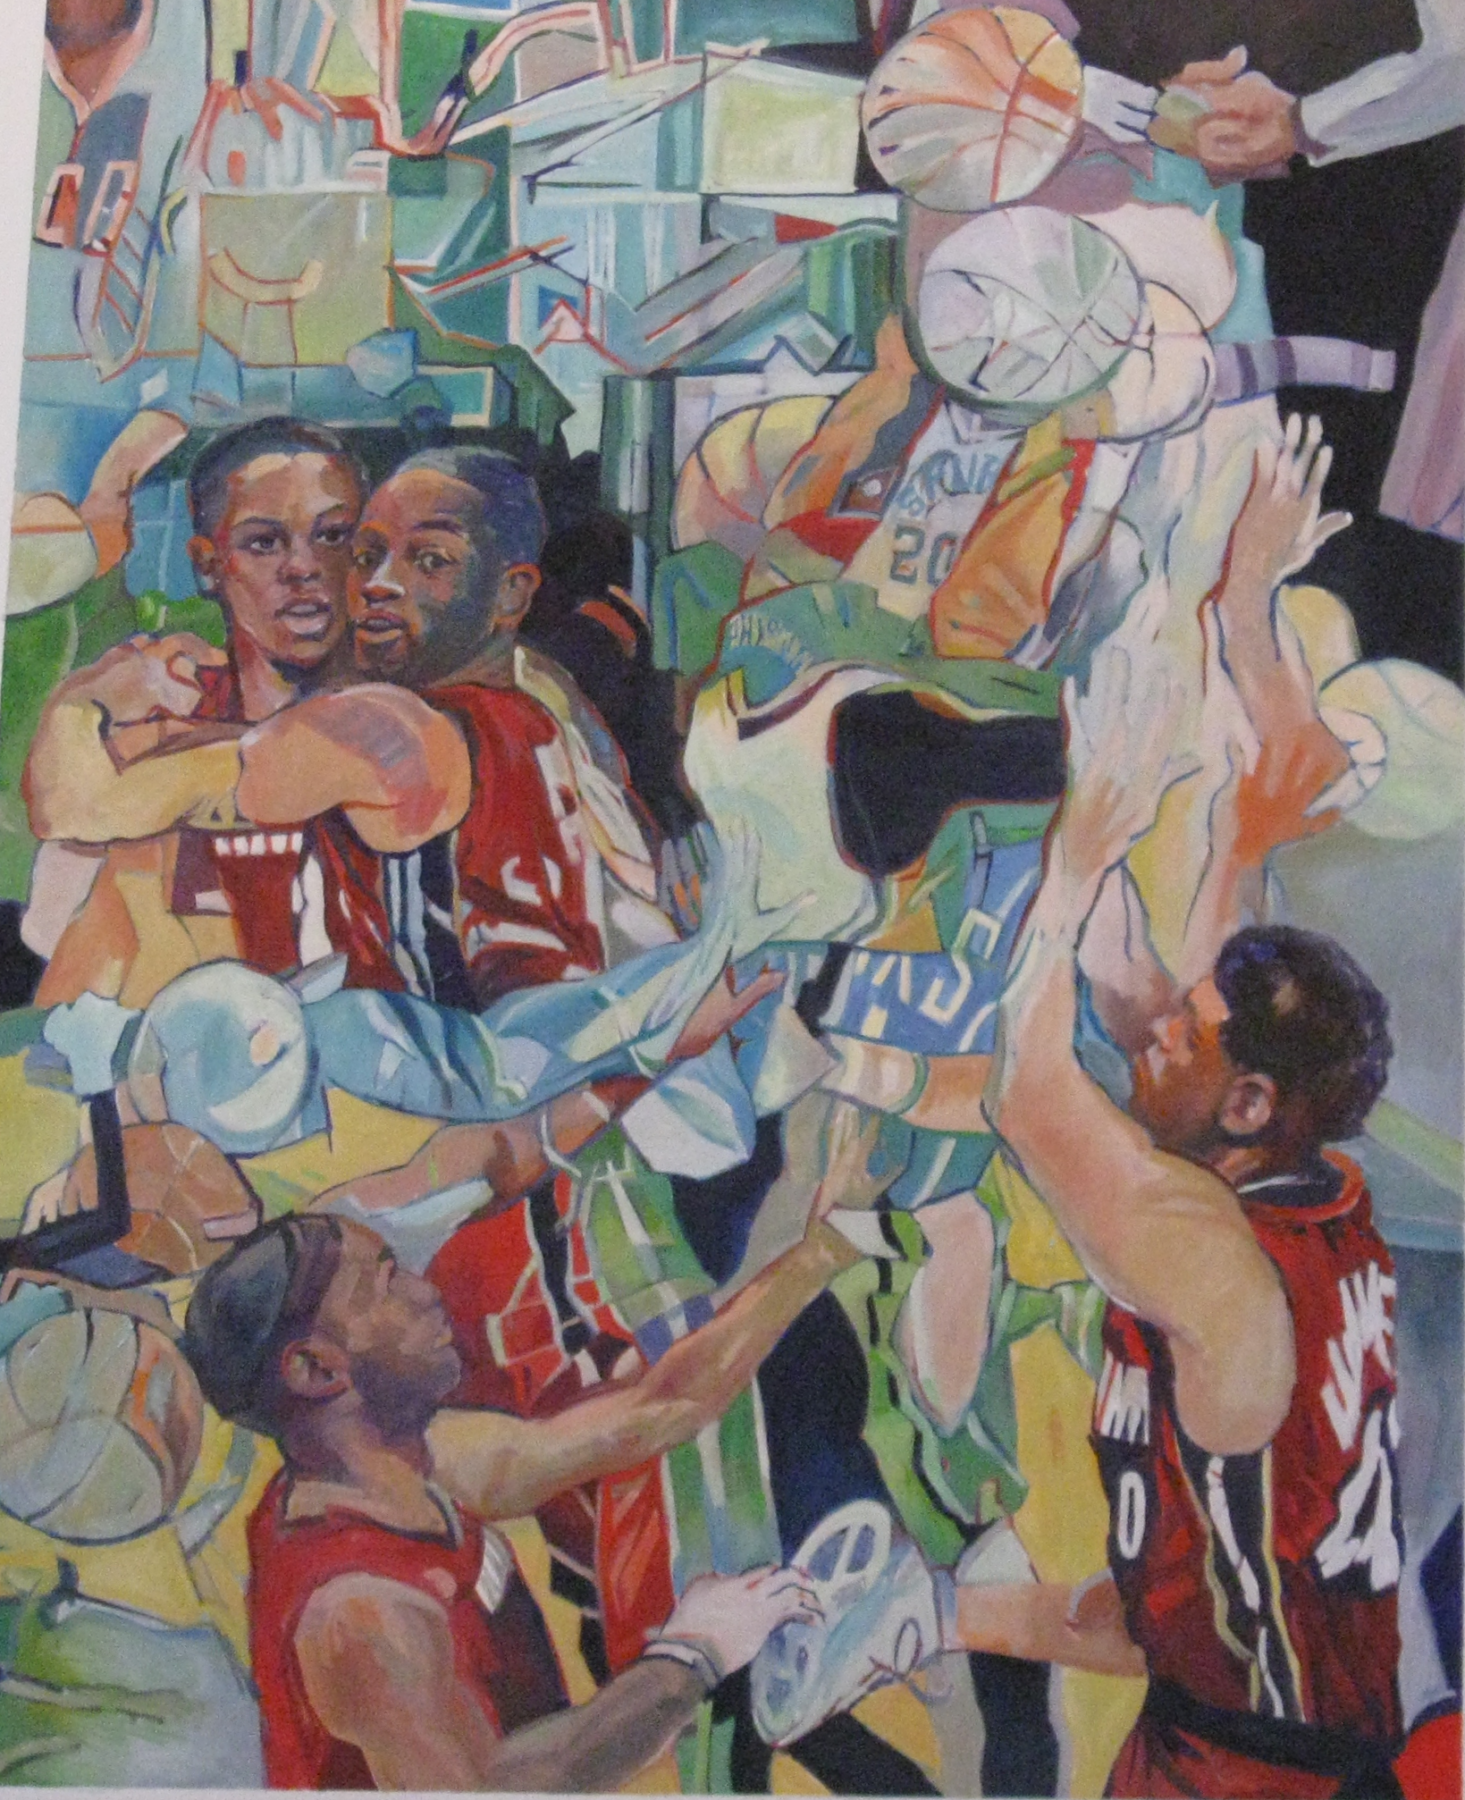 Painting of men involved in basketball.  Has a collage feeling.